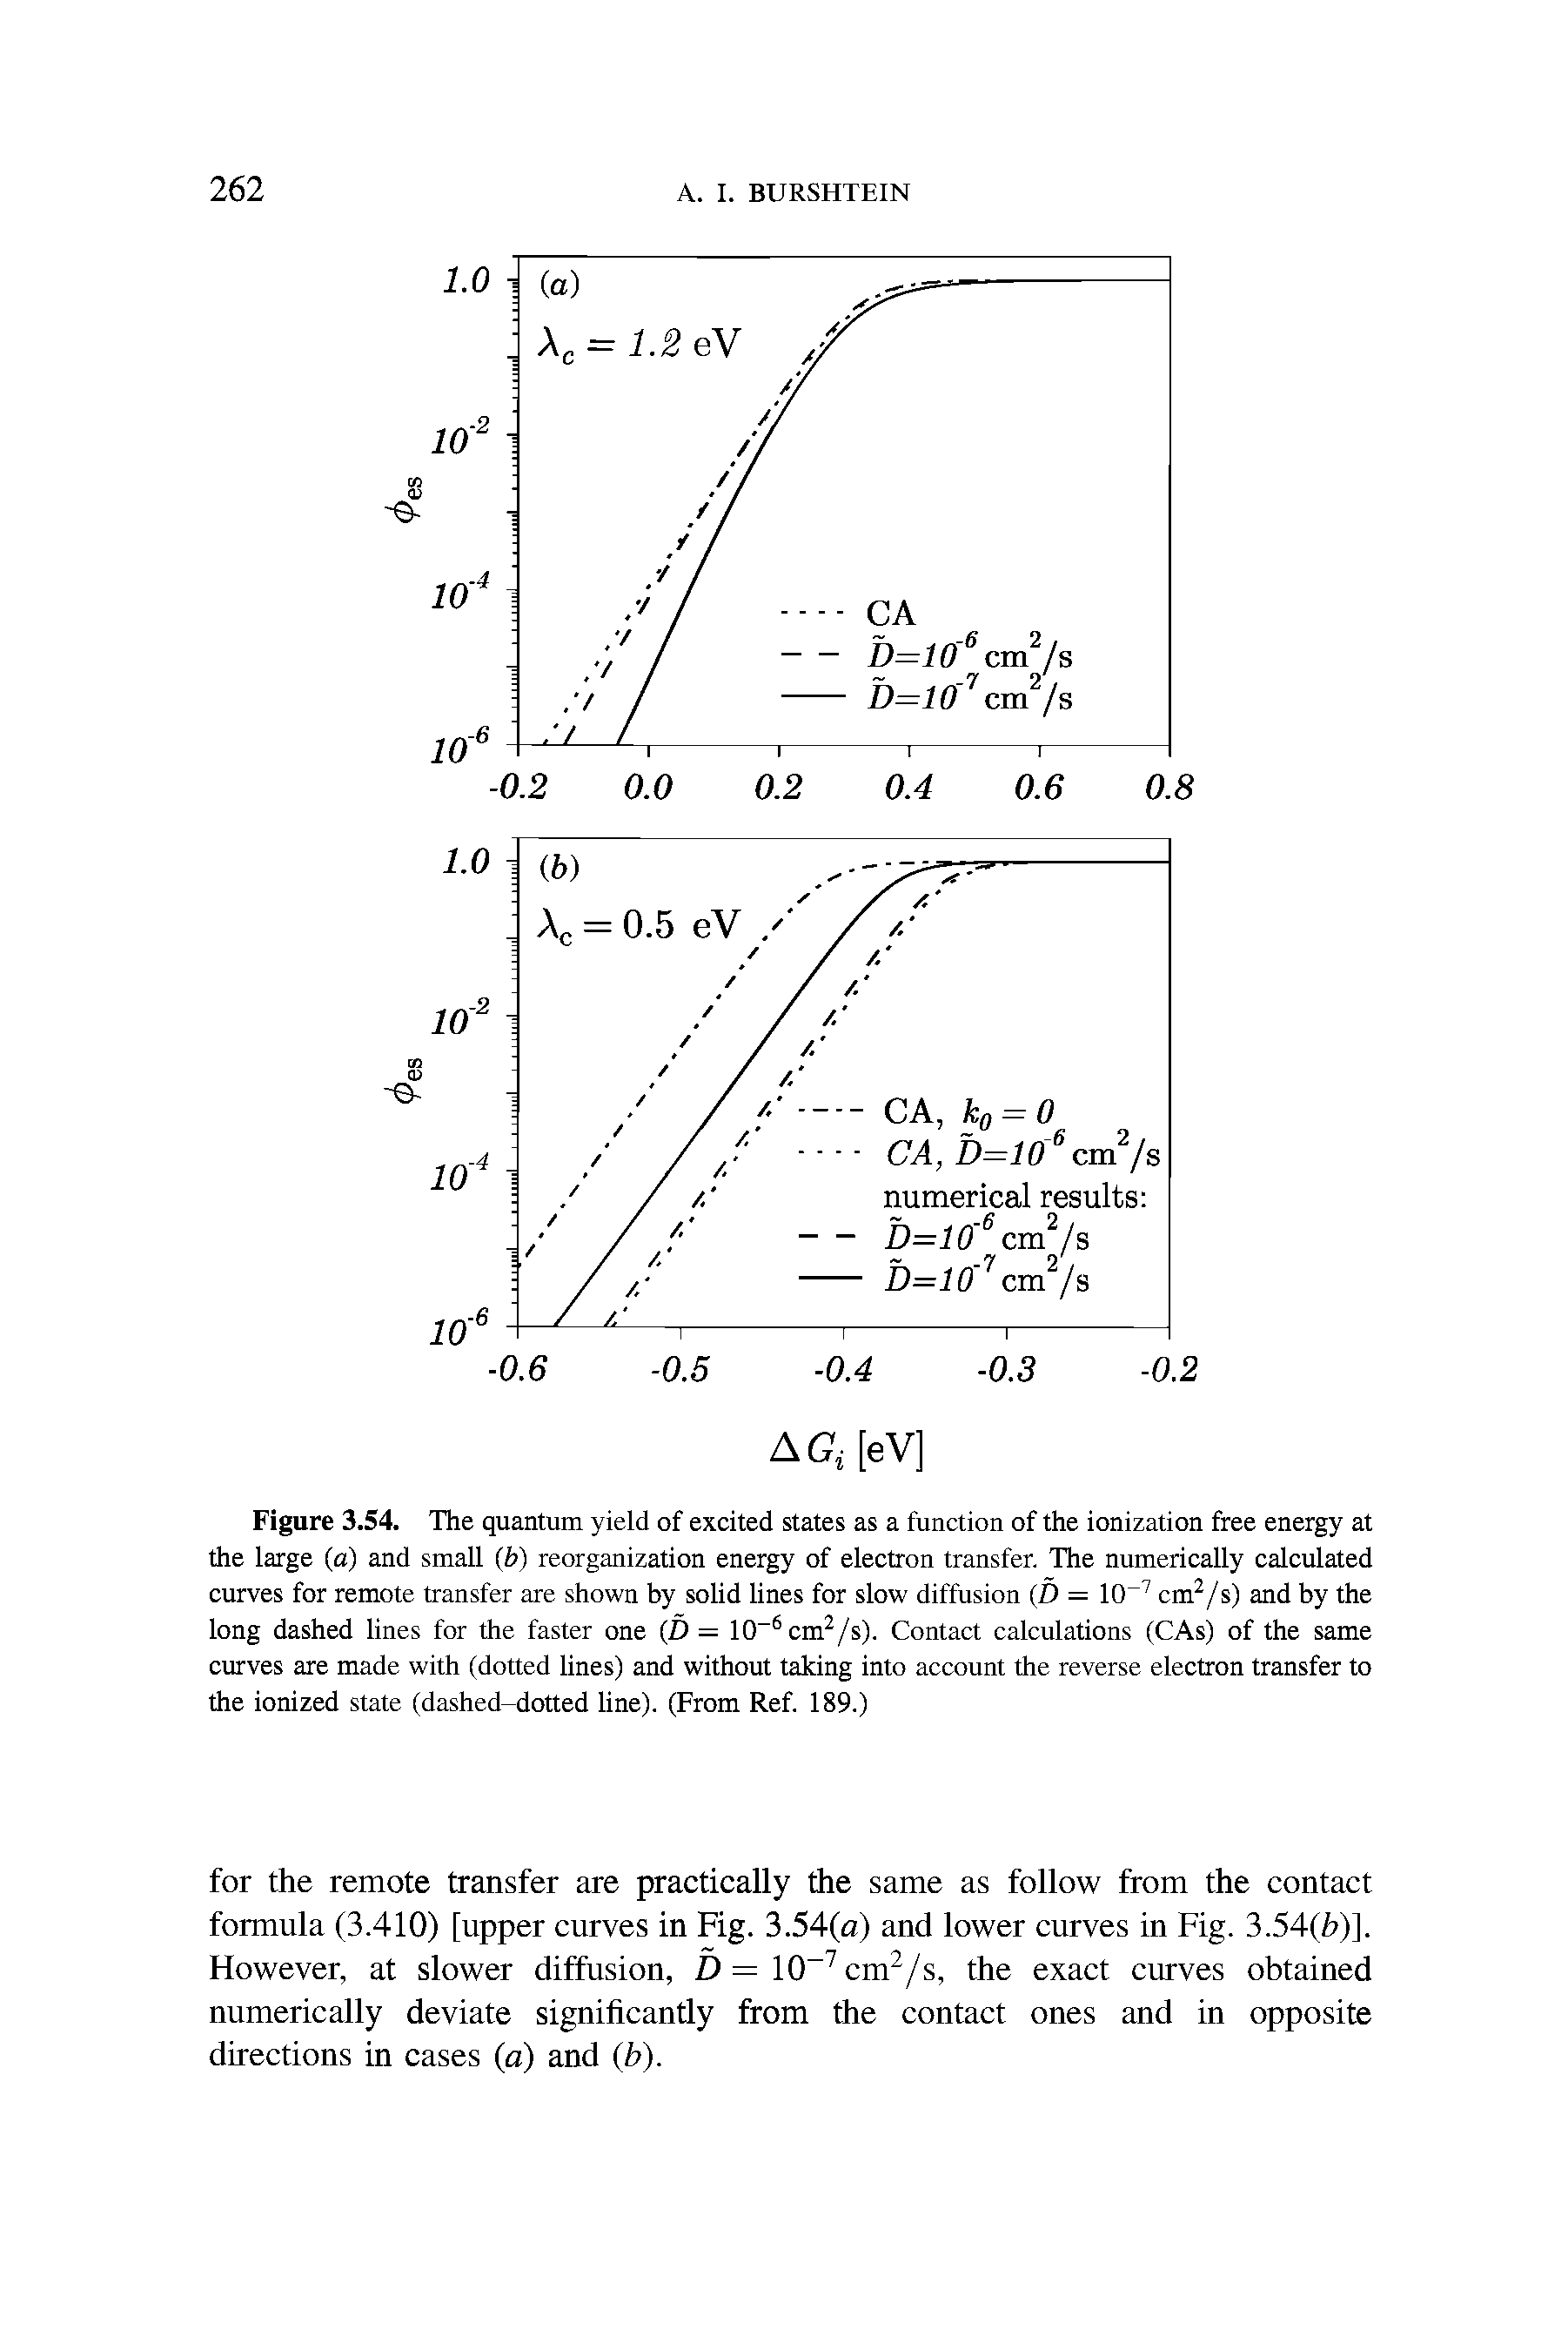 Figure 3.54. The quantum yield of excited states as a function of the ionization free energy at the large (a) and small (b) reorganization energy of electron transfer. The numerically calculated curves for remote transfer are shown by solid lines for slow diffusion (D = 1CT7 cm2/s) and by the long dashed lines for the faster one (D = 10 6cm2/s). Contact calculations (CAs) of the same curves are made with (dotted lines) and without taking into account the reverse electron transfer to the ionized state (dashed-dotted line). (From Ref. 189.)...